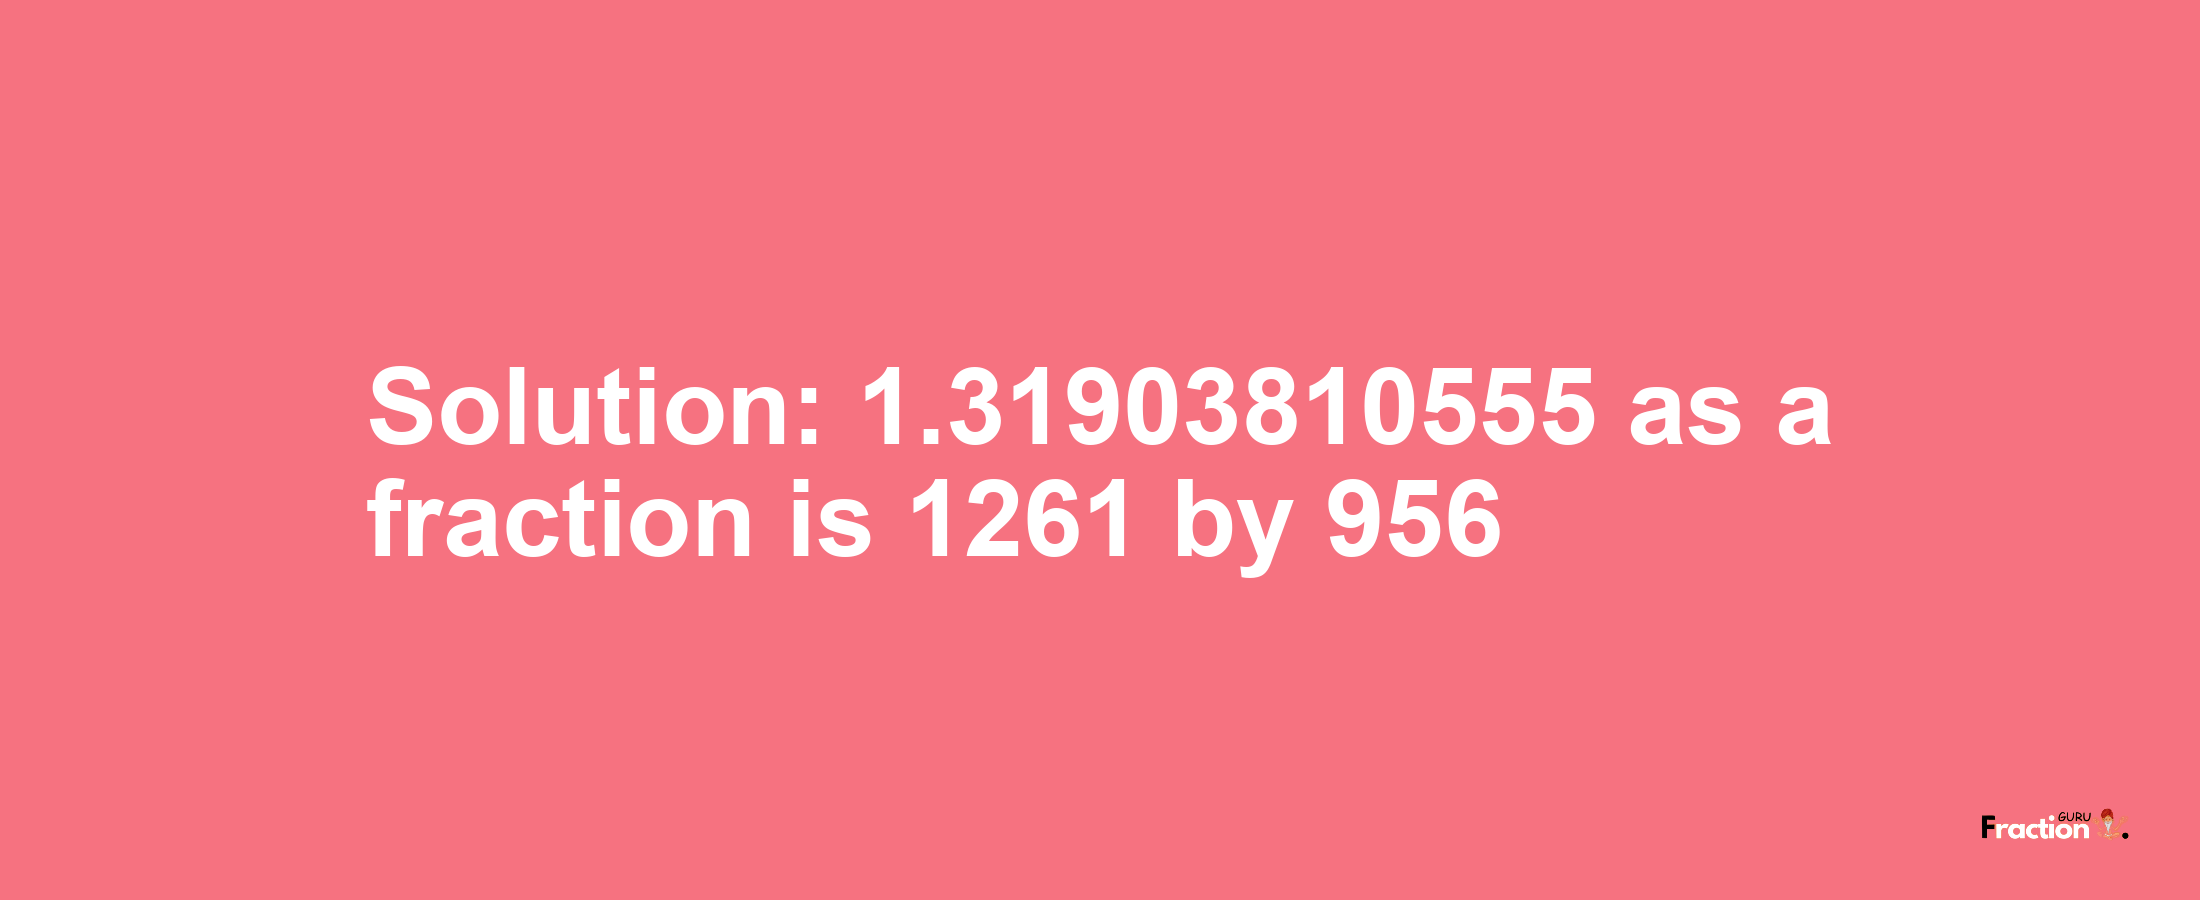 Solution:1.31903810555 as a fraction is 1261/956